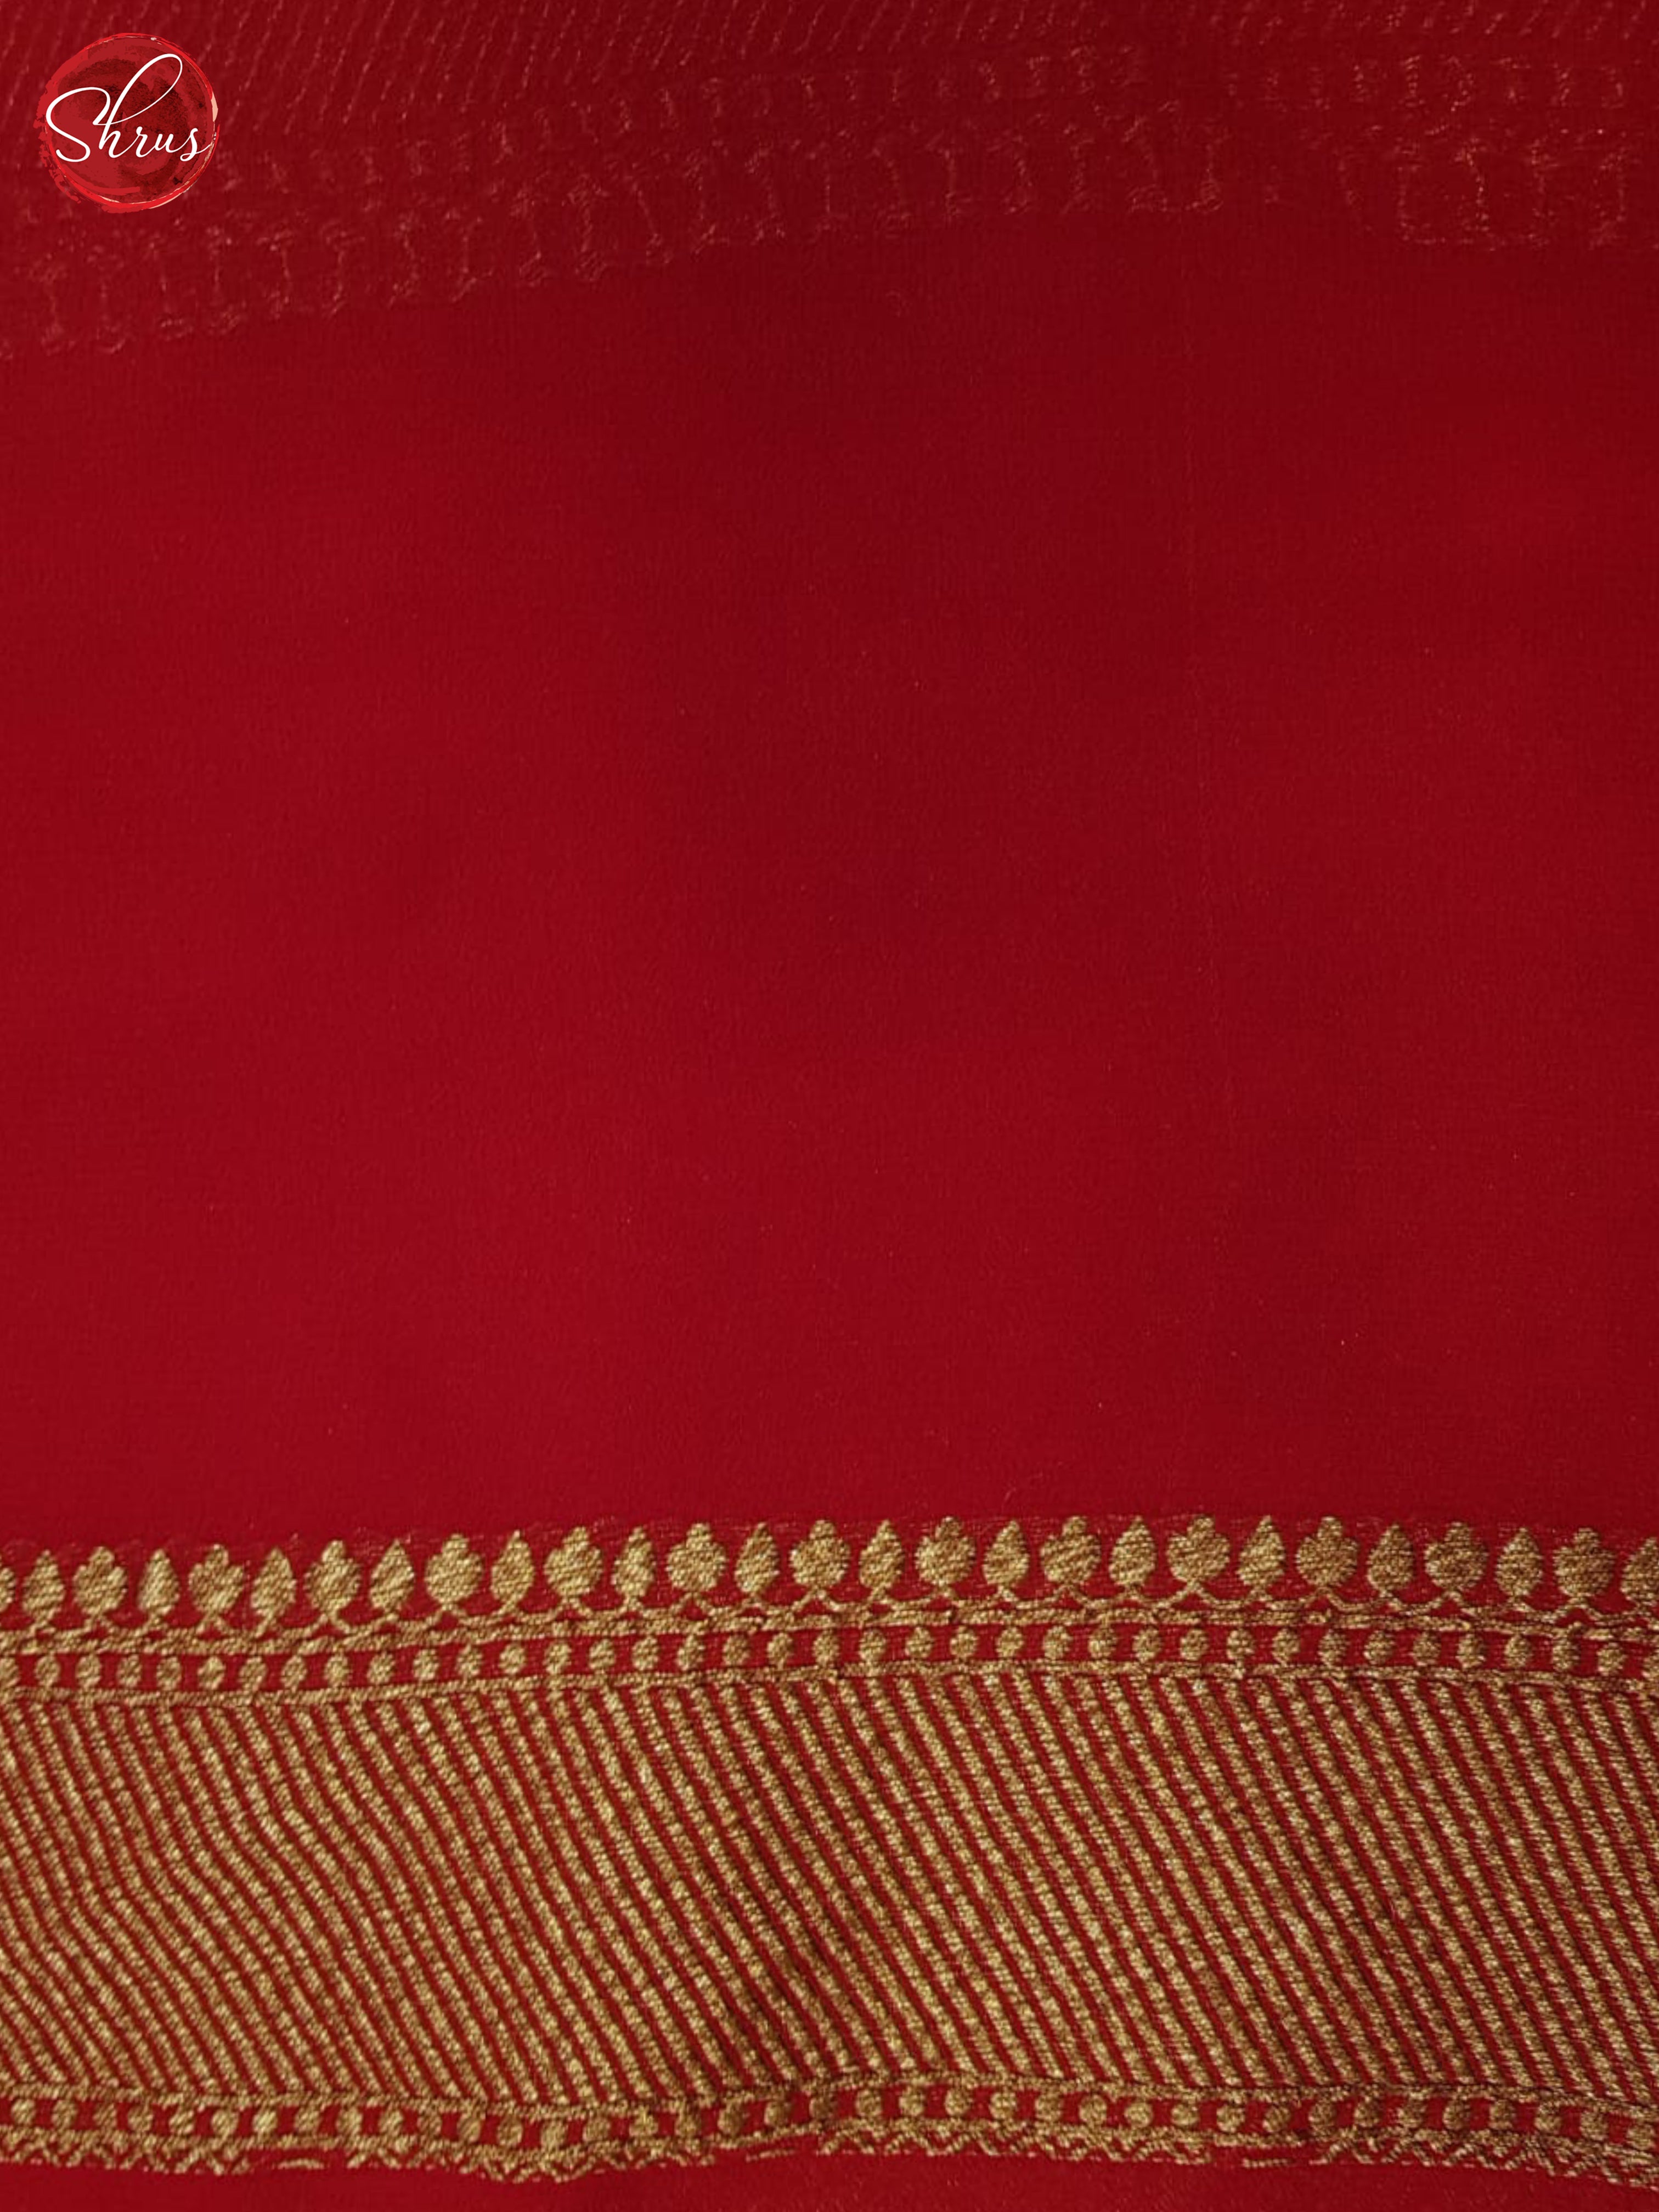 Green And red-Georgette Silk Saree - Shop on ShrusEternity.com